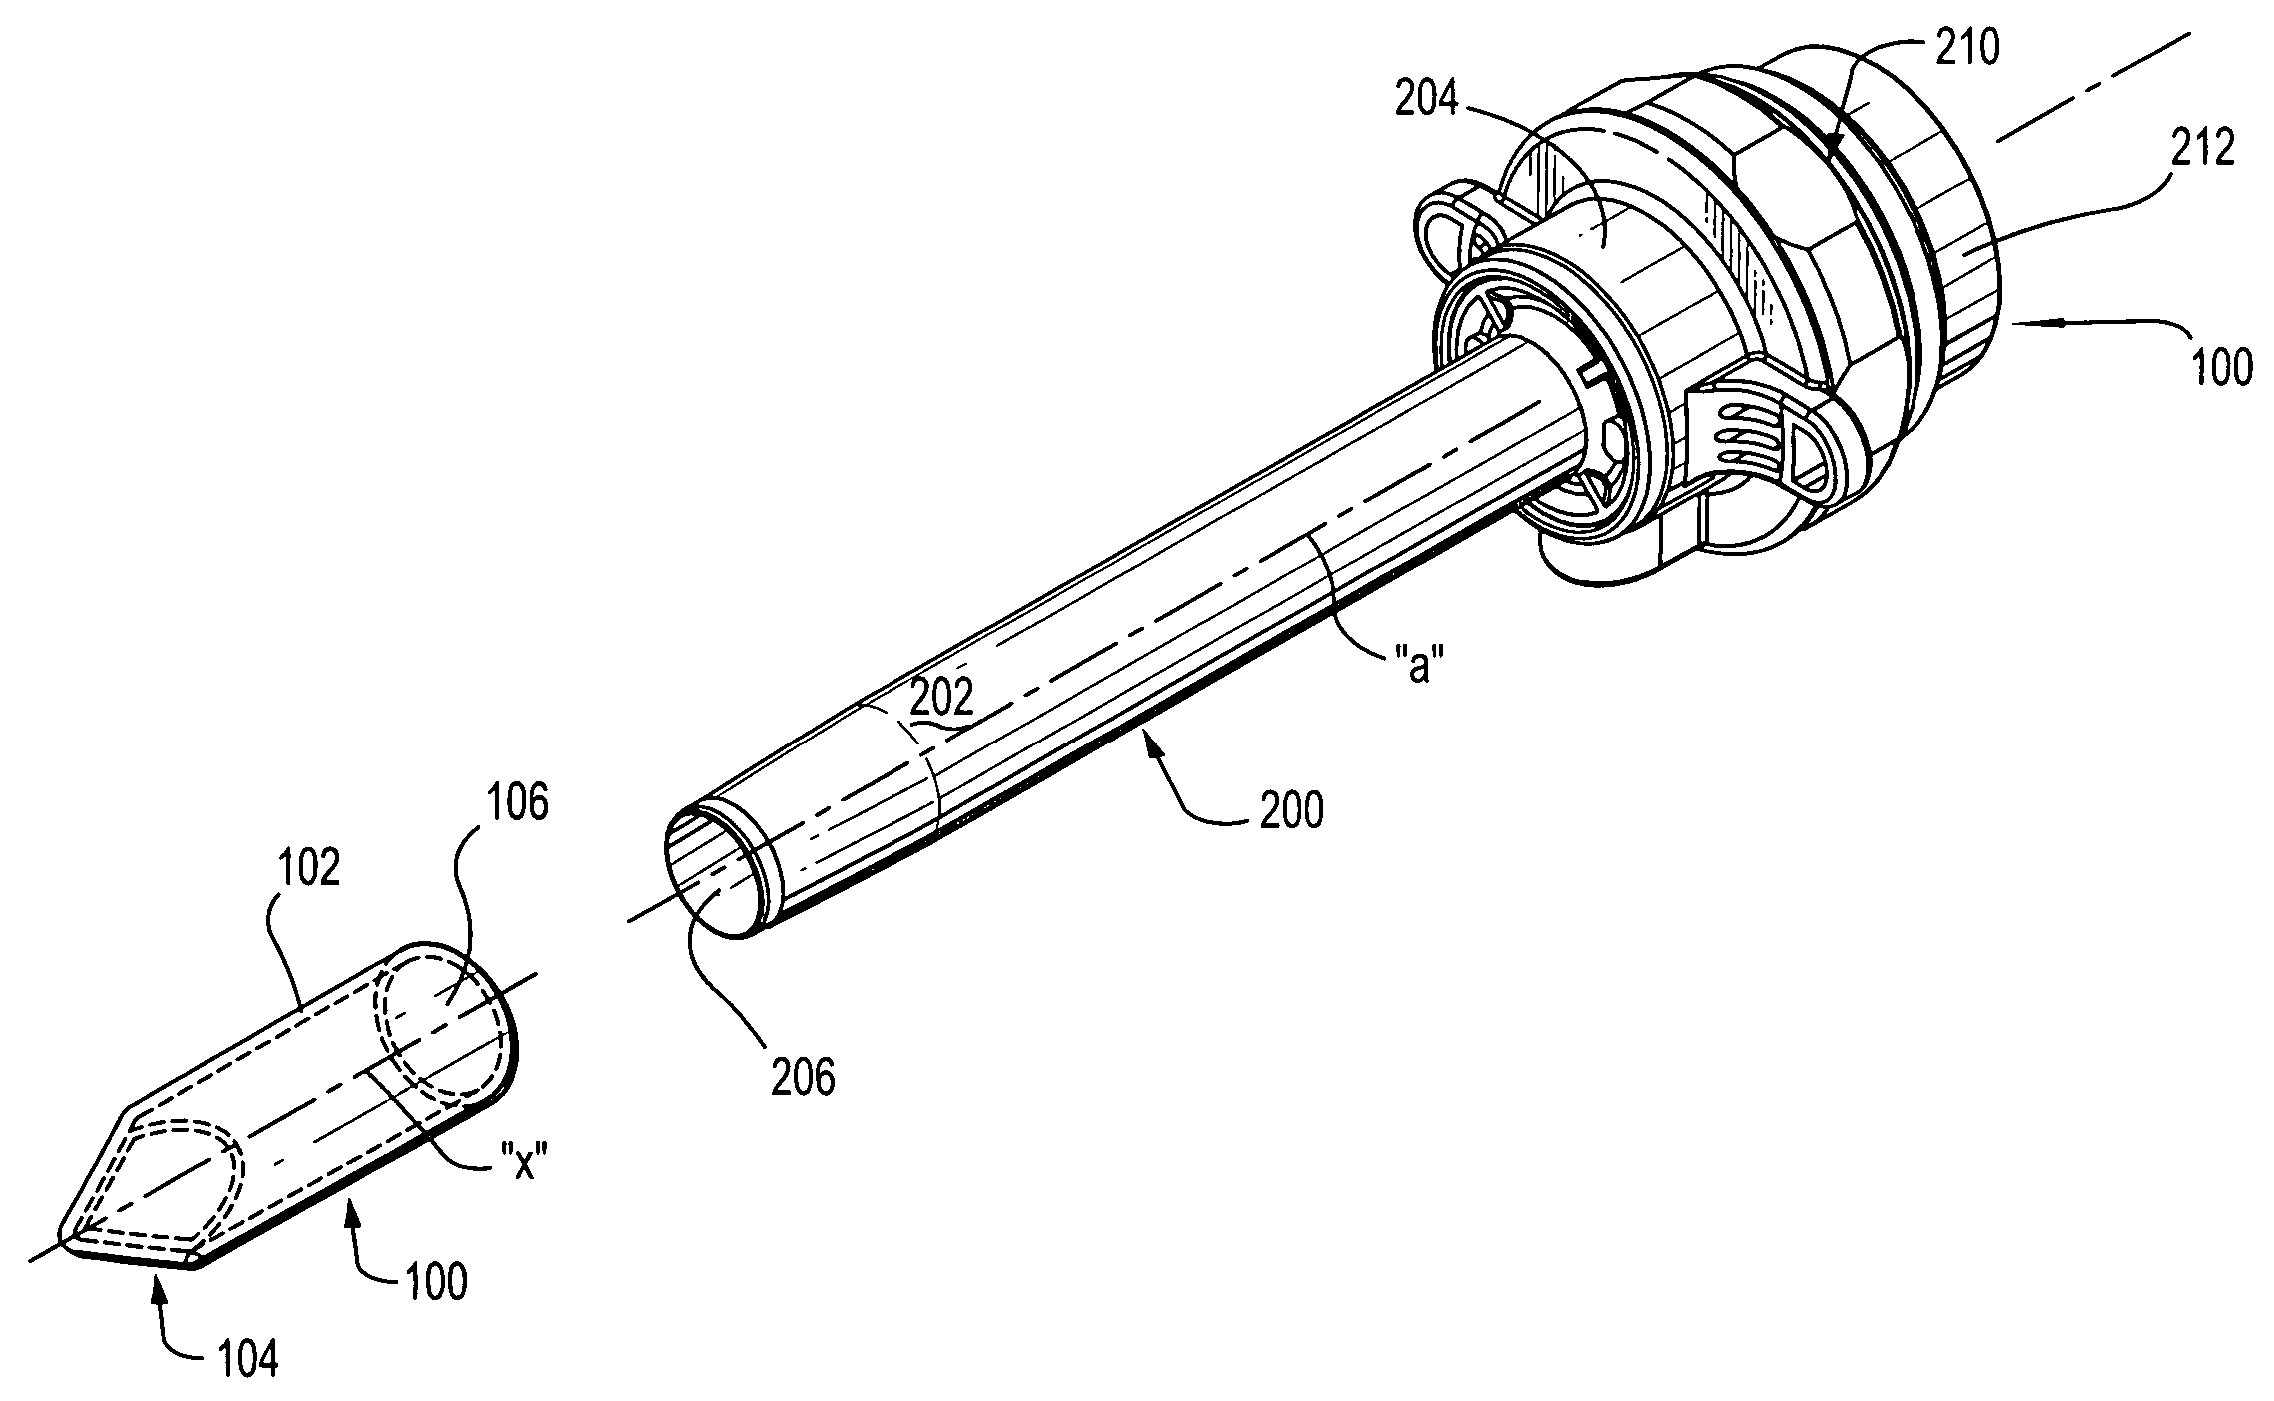 Optical penetrating adapter for surgical portal